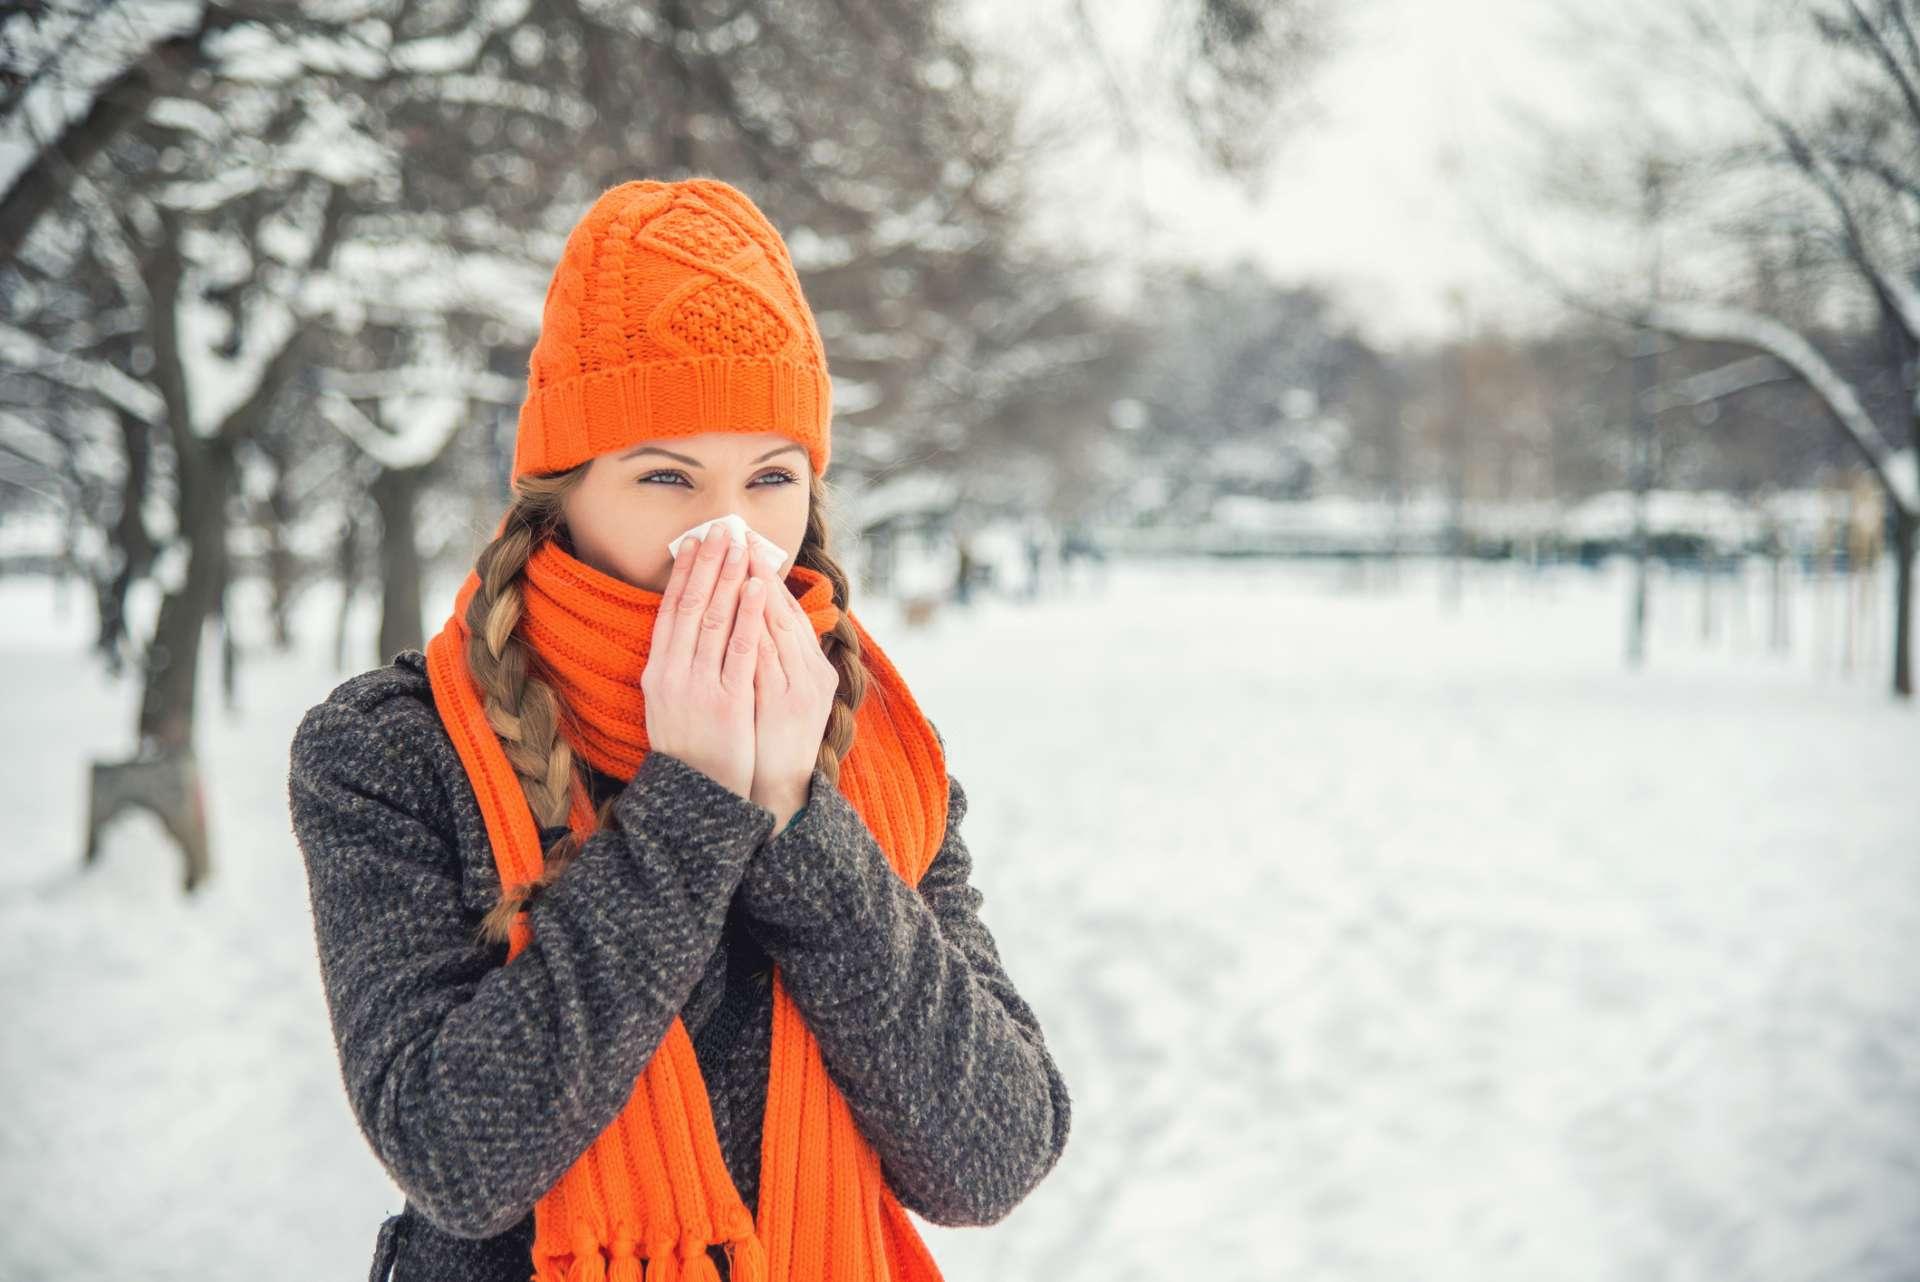 A young woman with braided long blond hair is outdoors in a park during the winter. There is snow and trees in the background. She is wearing winter clothes, an orange hat and scarf, and is blowing her nose with a handkerchief / hanky / tissue. She is looking away from the camera. With copy space.